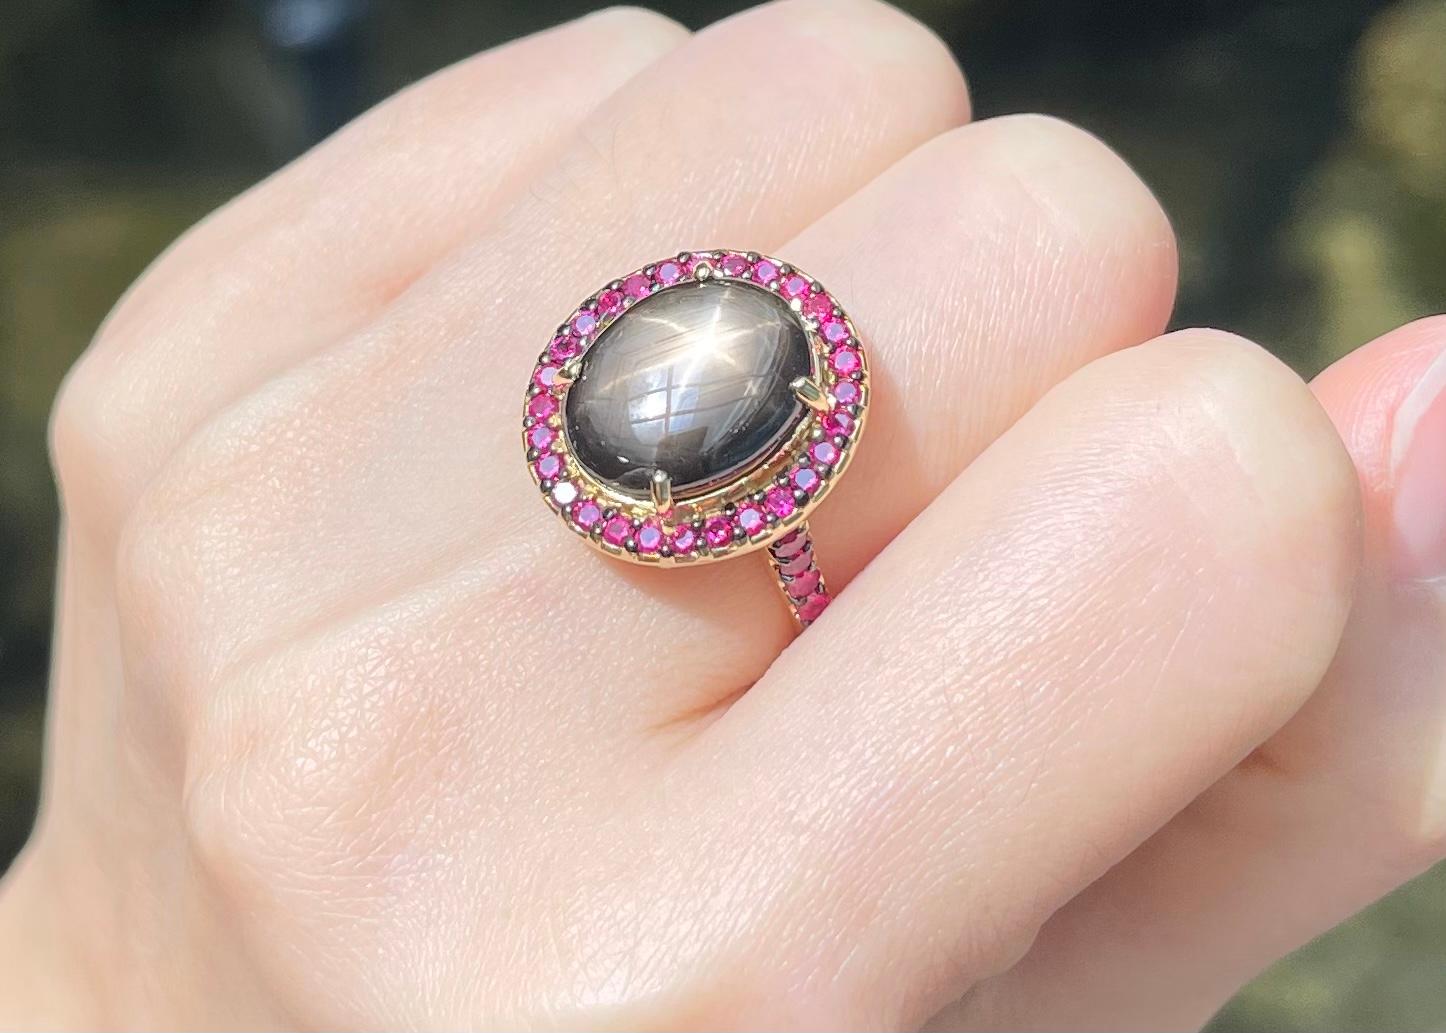 Black Star Sapphire 7.23 carats with Ruby 0.82 carat Ring set in 18K Gold Settings 

Width:  1.7 cm 
Length: 1.9 cm
Ring Size: 52
Total Weight: 7.94 grams

